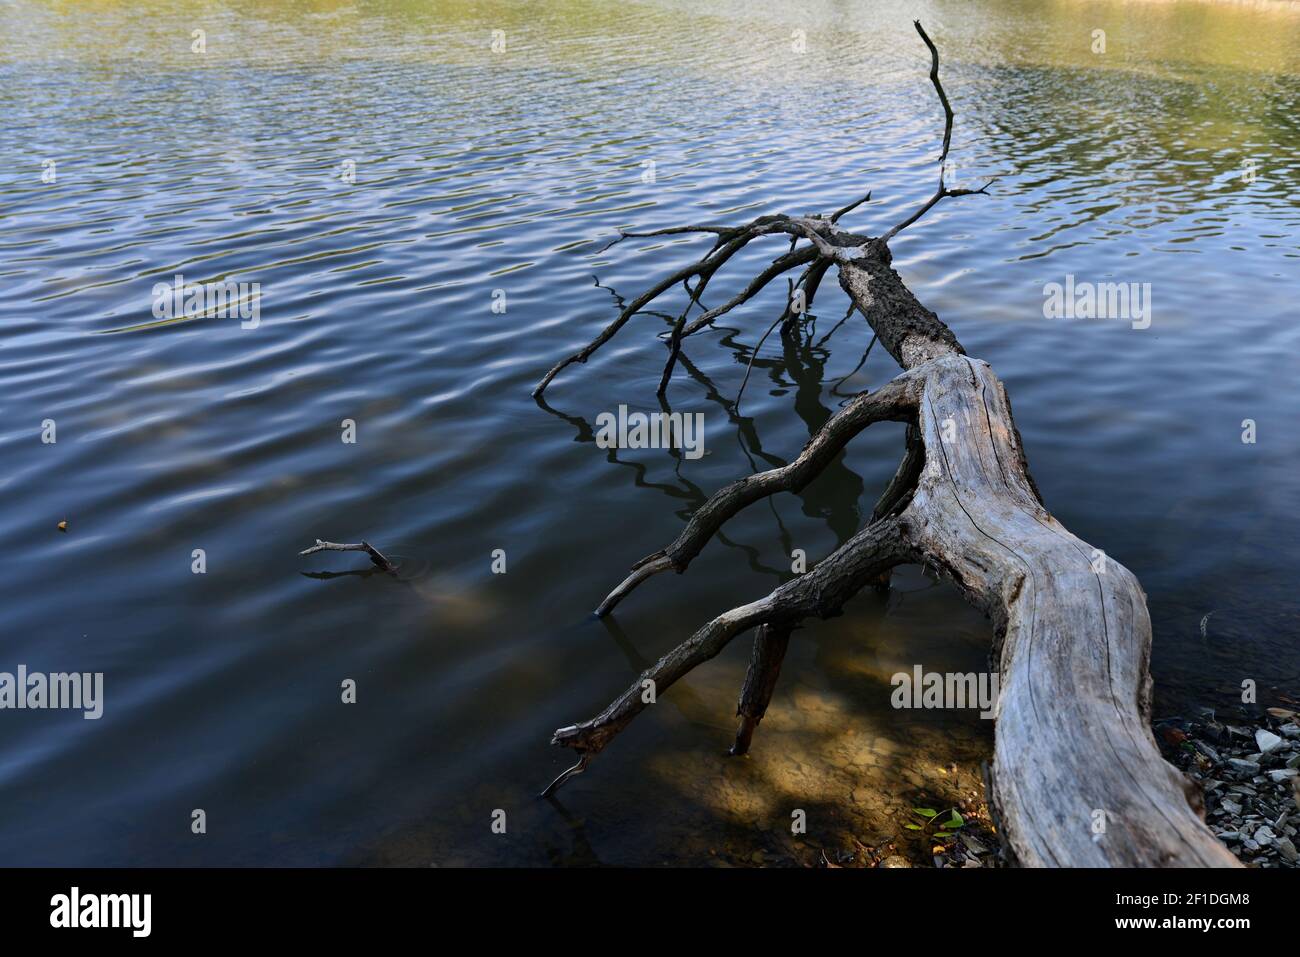 View of the trunk of an old tree fallen into the water of the lake. Dry tree in the water. Stone shore of the lake. Rippled water surface. Sunbeams pe Stock Photo